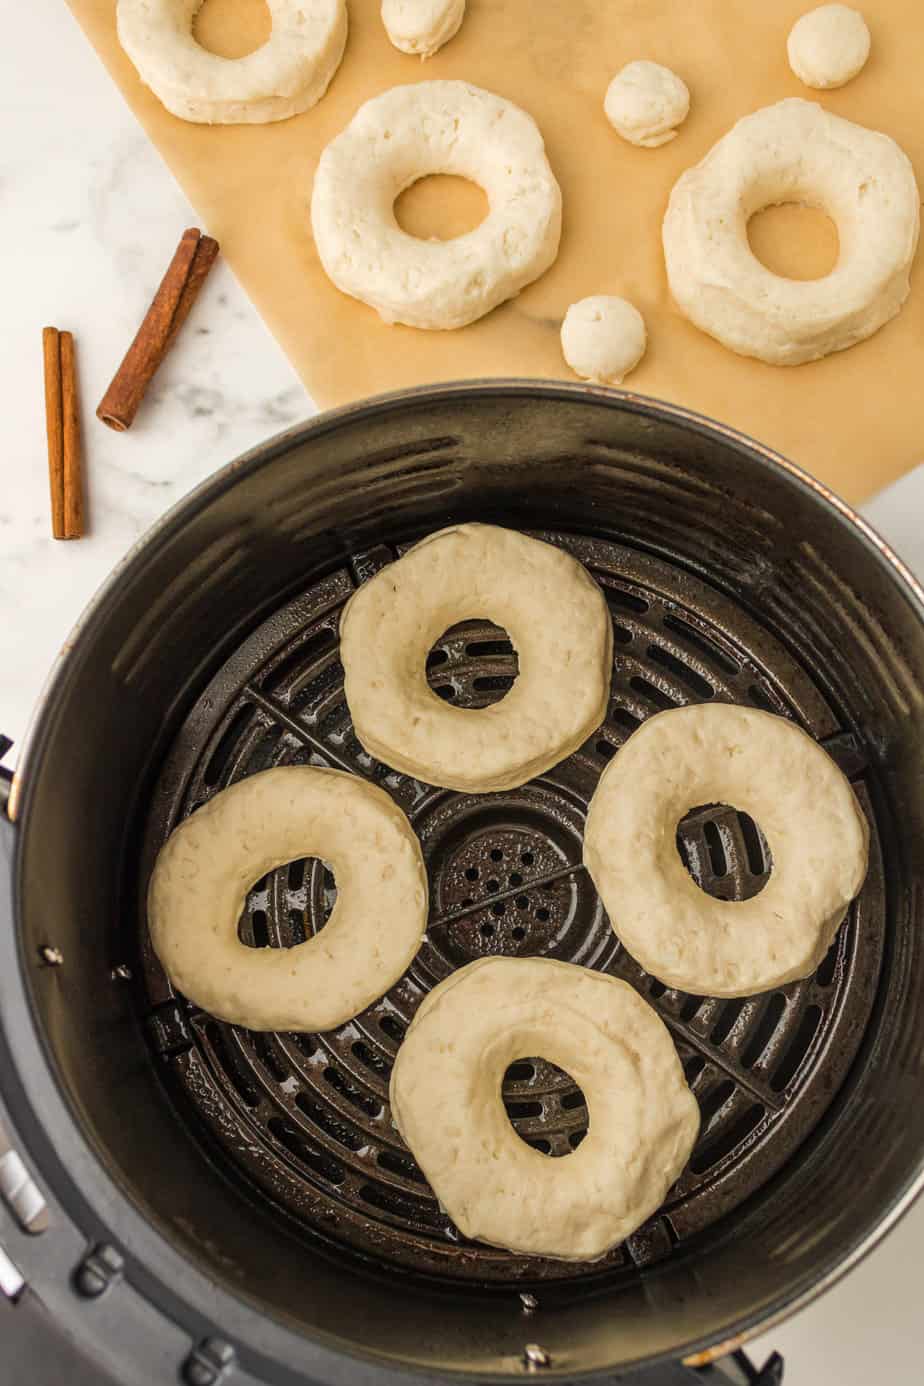 Four round donuts with centers missing placed in the basket of an air fryer from above on the counter with a cutting board and more extra raw doughnuts nearby.